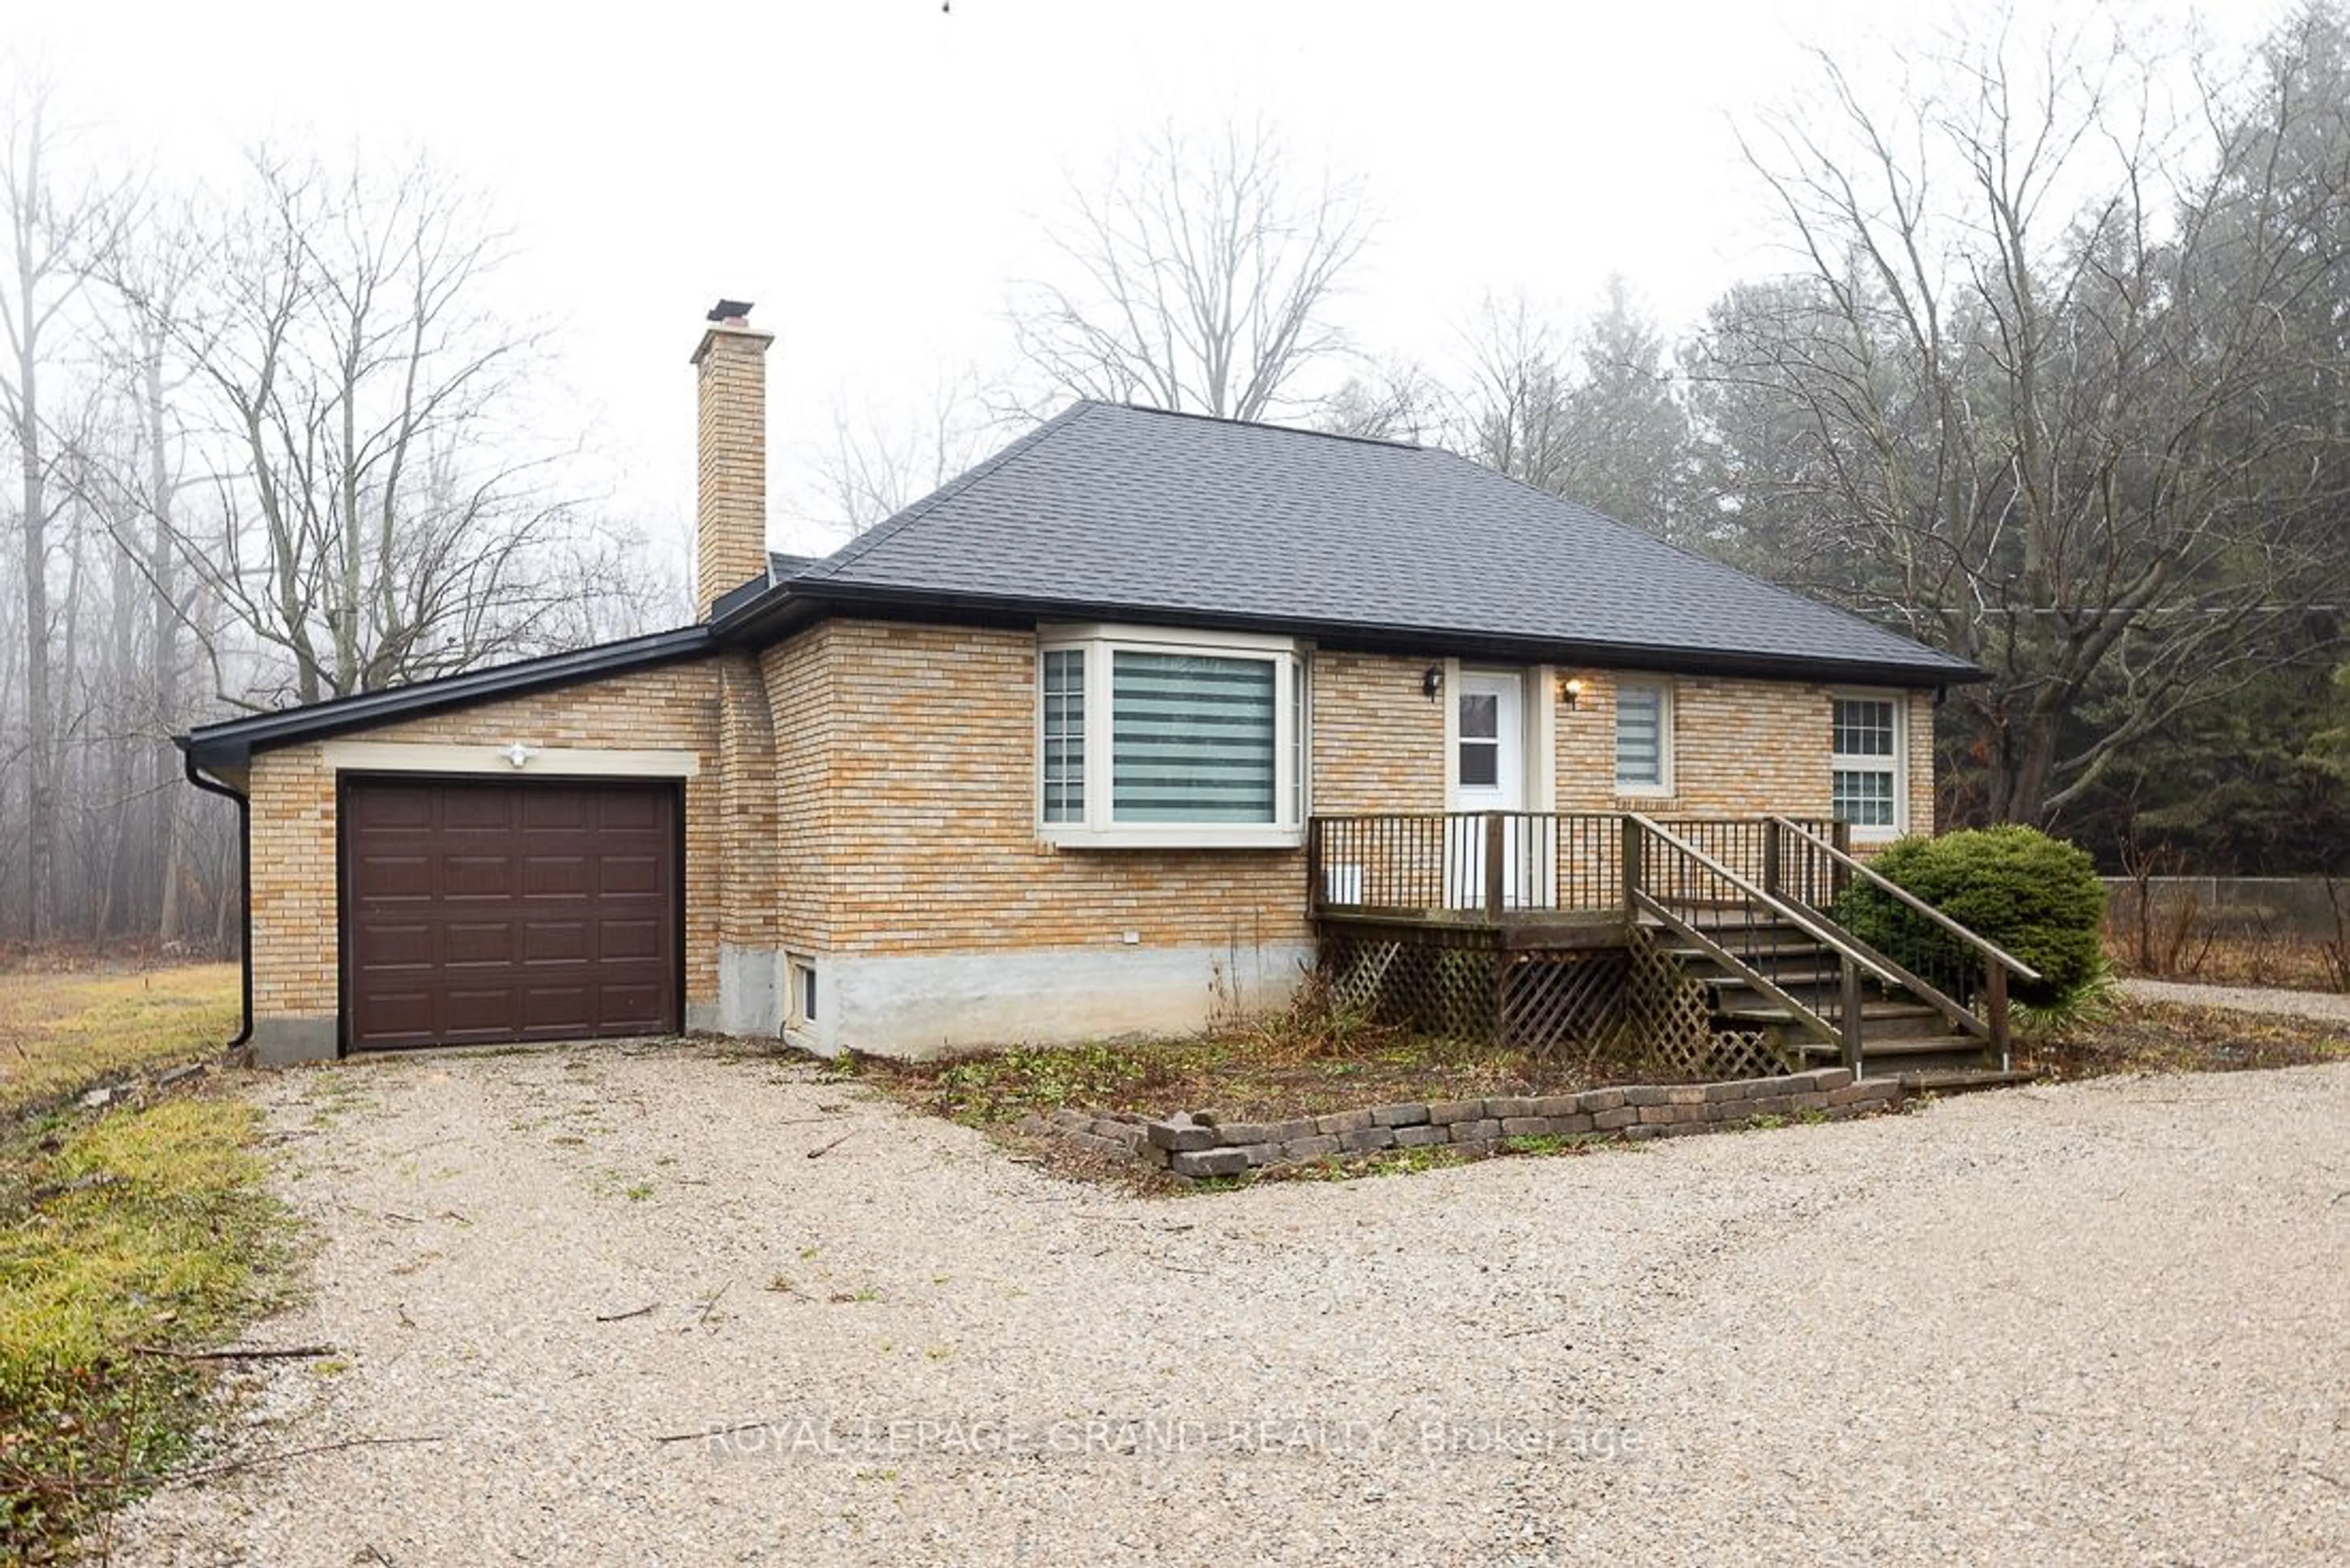 Cottage for 9630 Sunset Dr, St. Thomas Ontario N5P 3T2